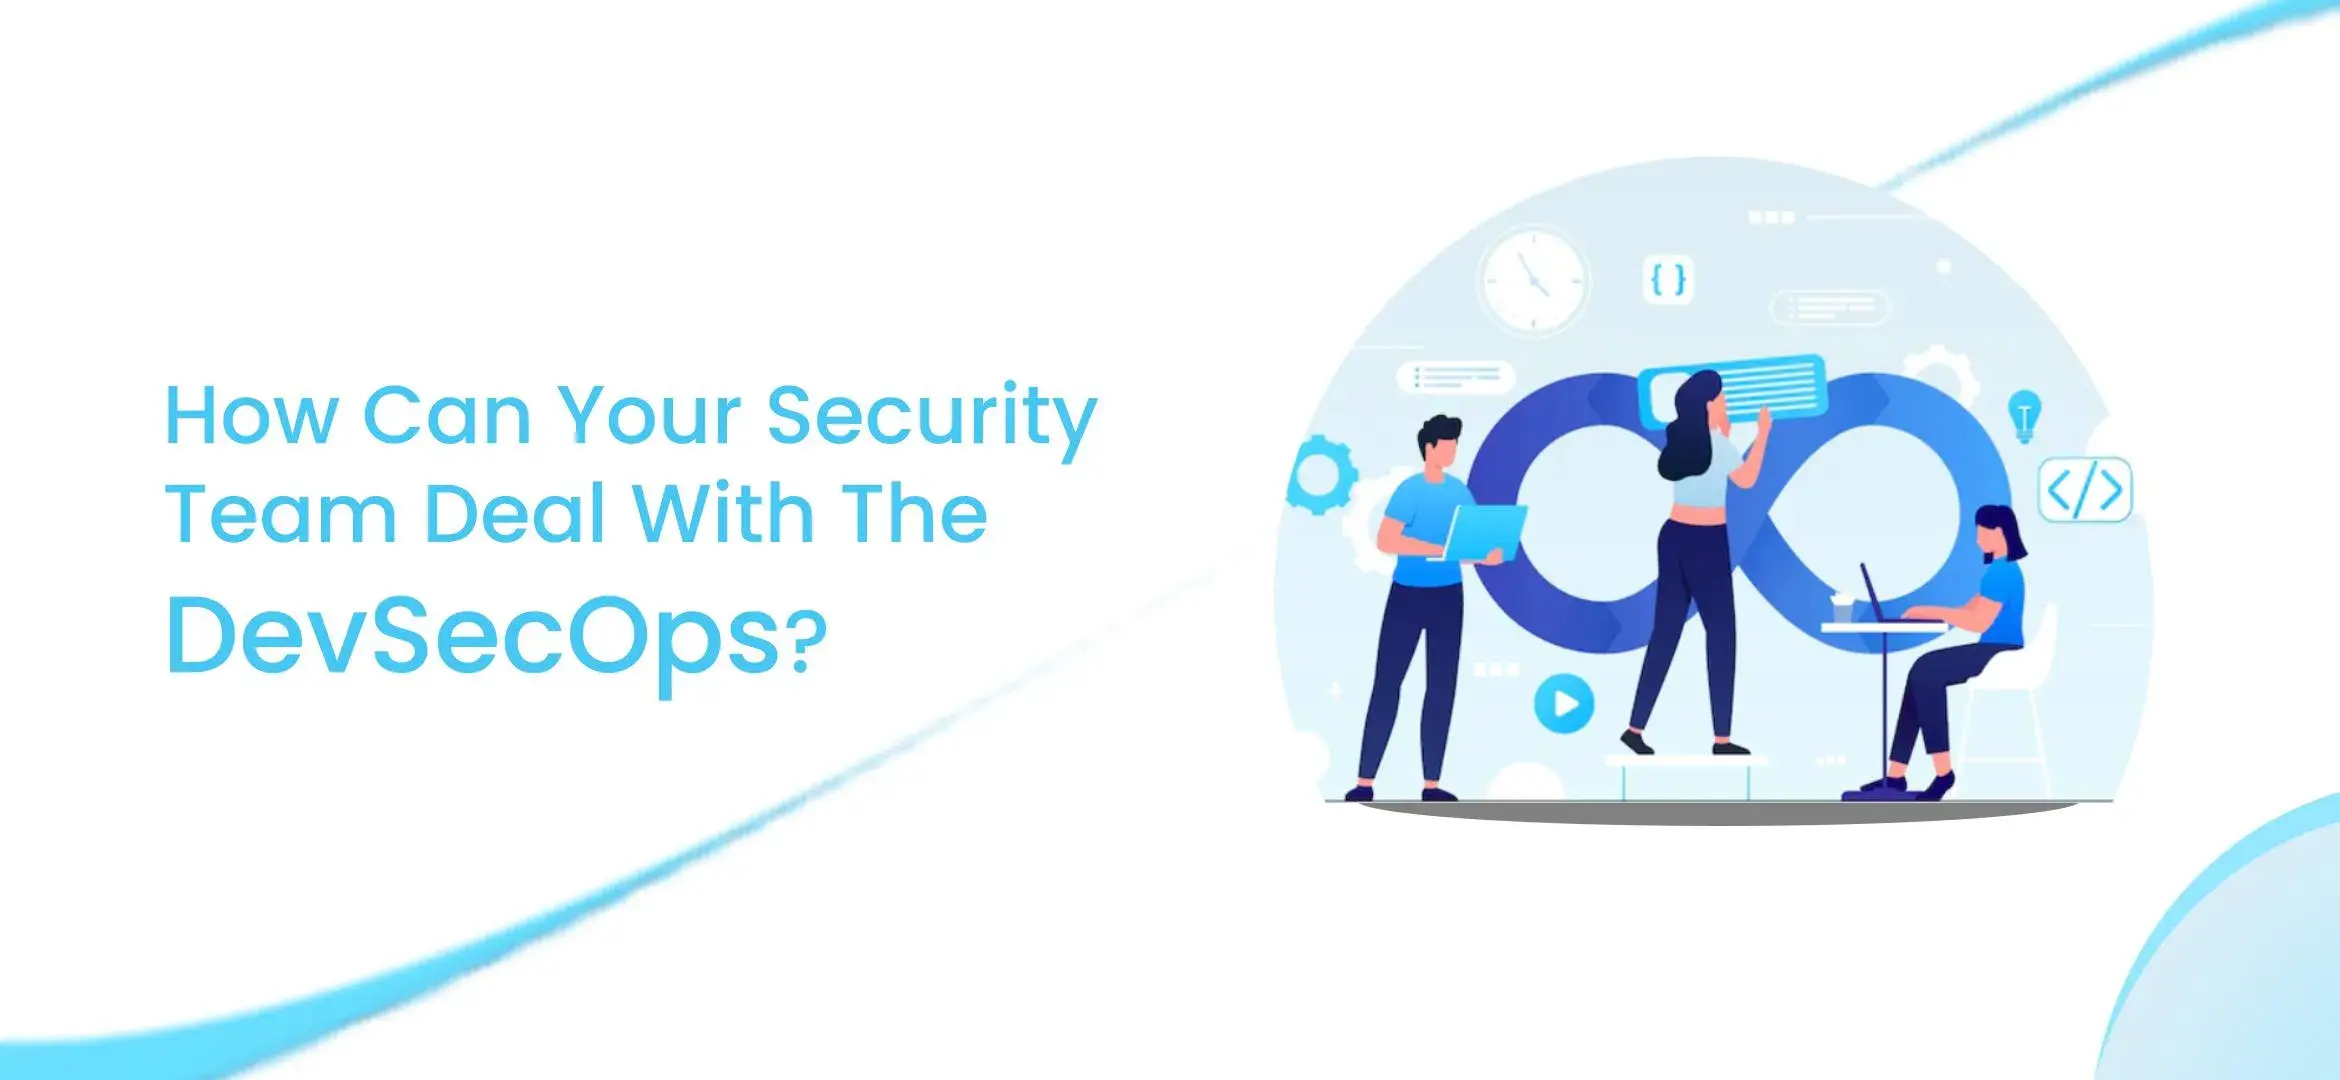 How Can Your Security Team Deal With DevSecOps?